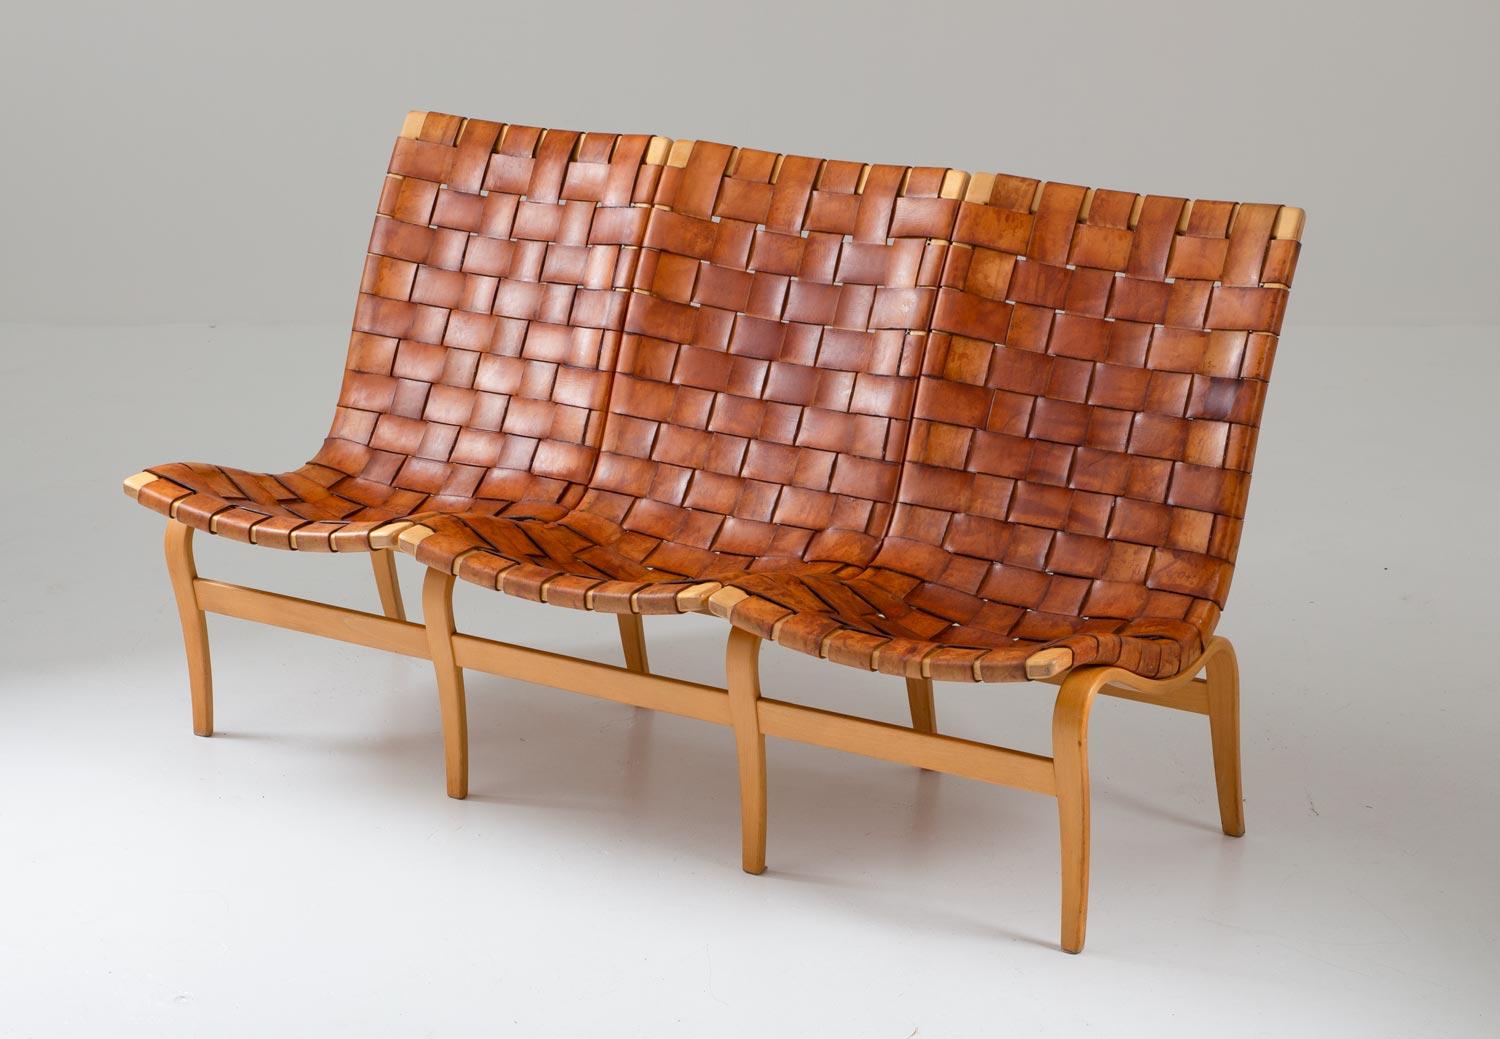 Rare “Eva” three-seat sofa by Bruno Mathsson, with a wreathed leather seat on a beech bentwood frame. Perfect patinated naturally colored leather. Manufactured in 1966 by Firma Karl Mathsson, Sweden.

Condition: The wooden frame is in very good